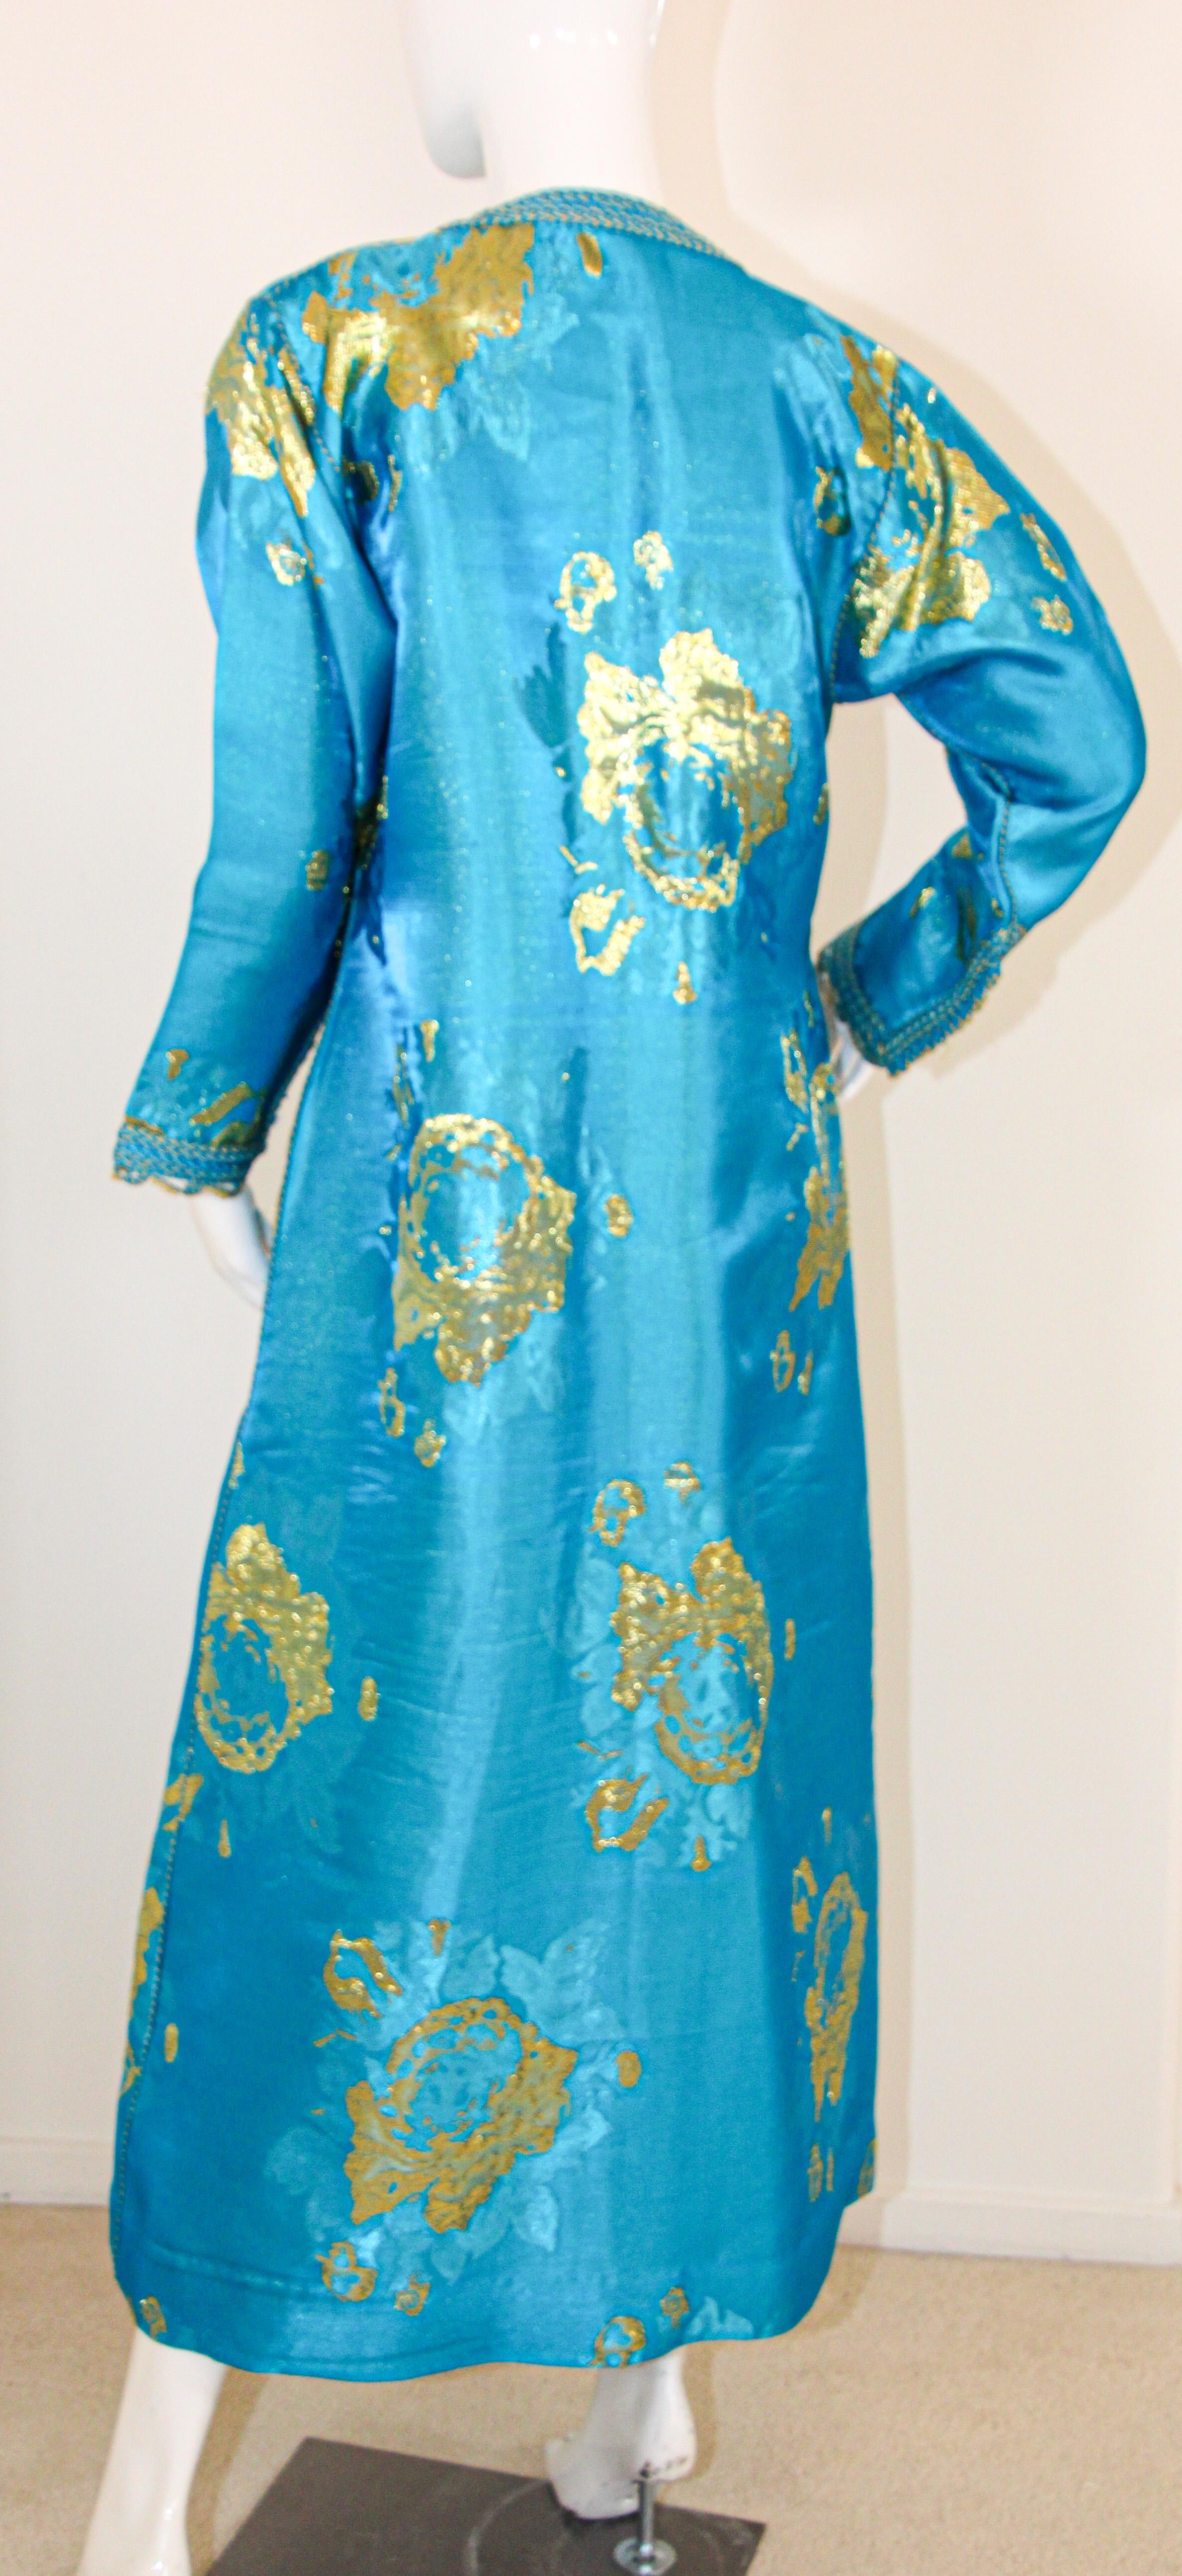 Moroccan Vintage Kaftan in Turquoise and Gold Floral Brocade Metallic Lame 6